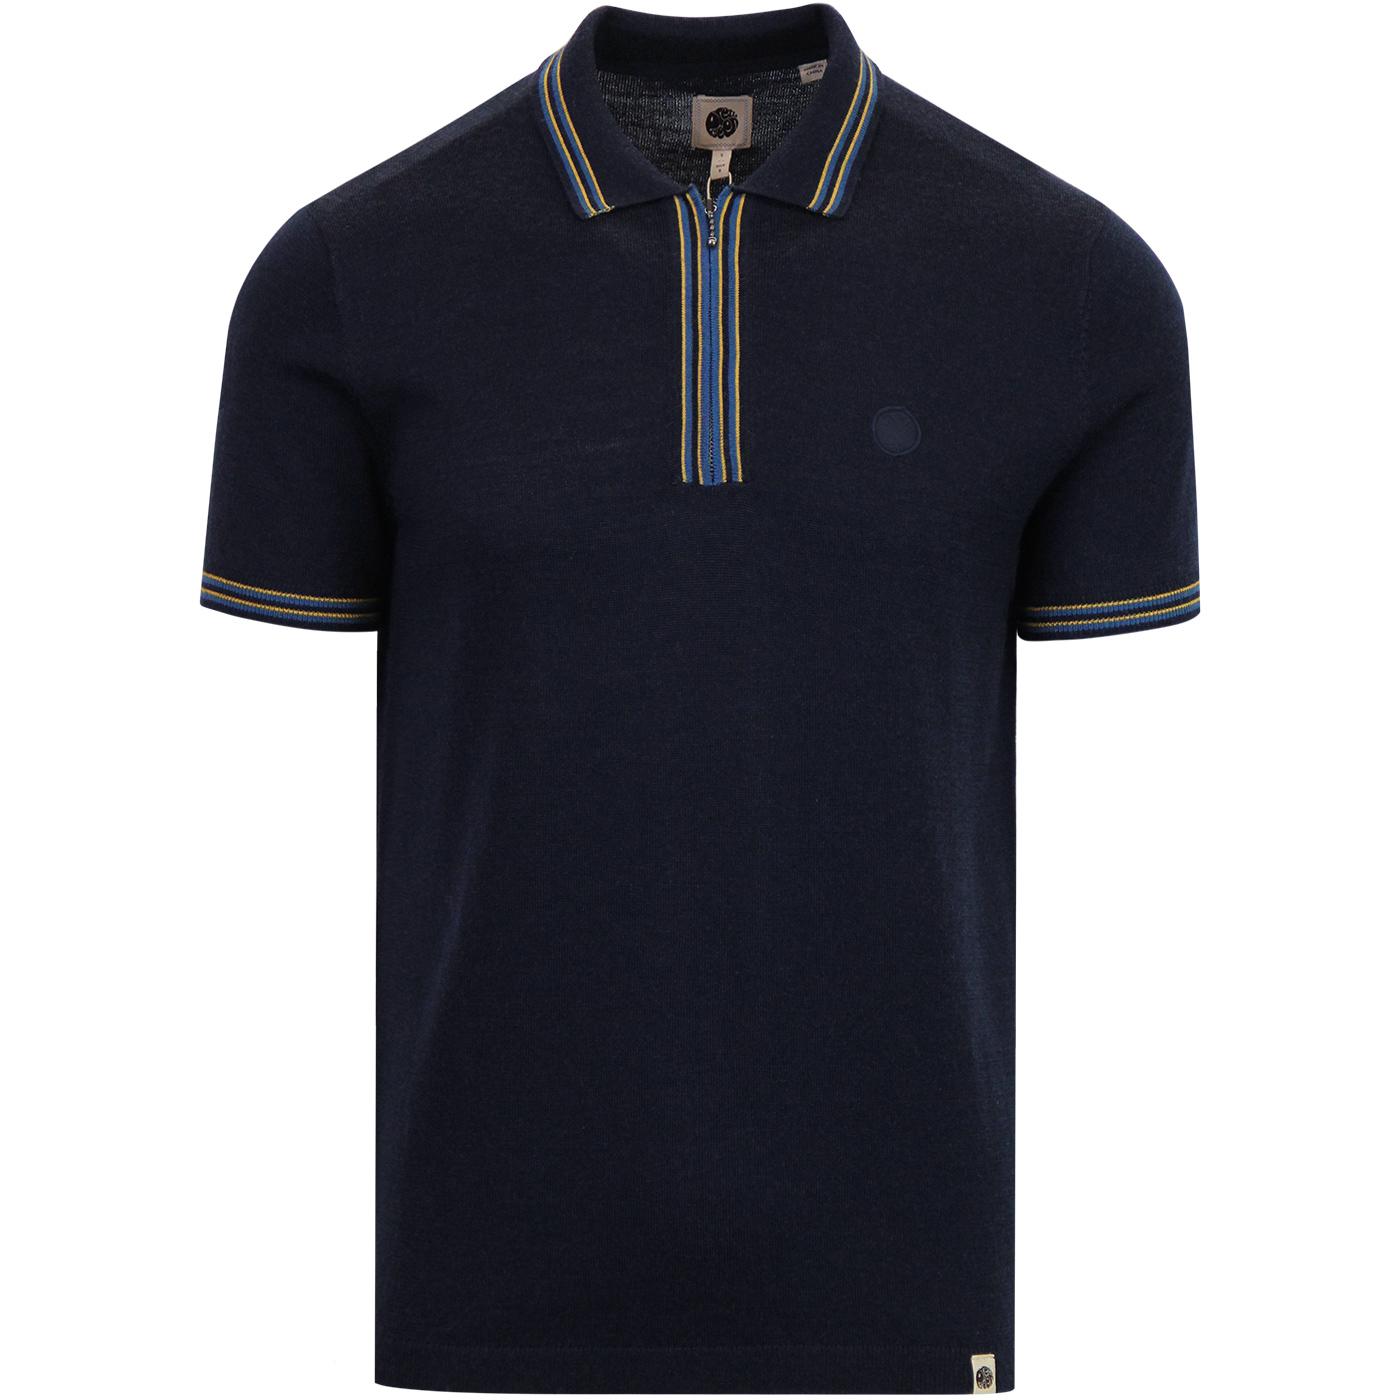 PRETTY GREEN Mod Zip Neck Tipped Knitted Polo N